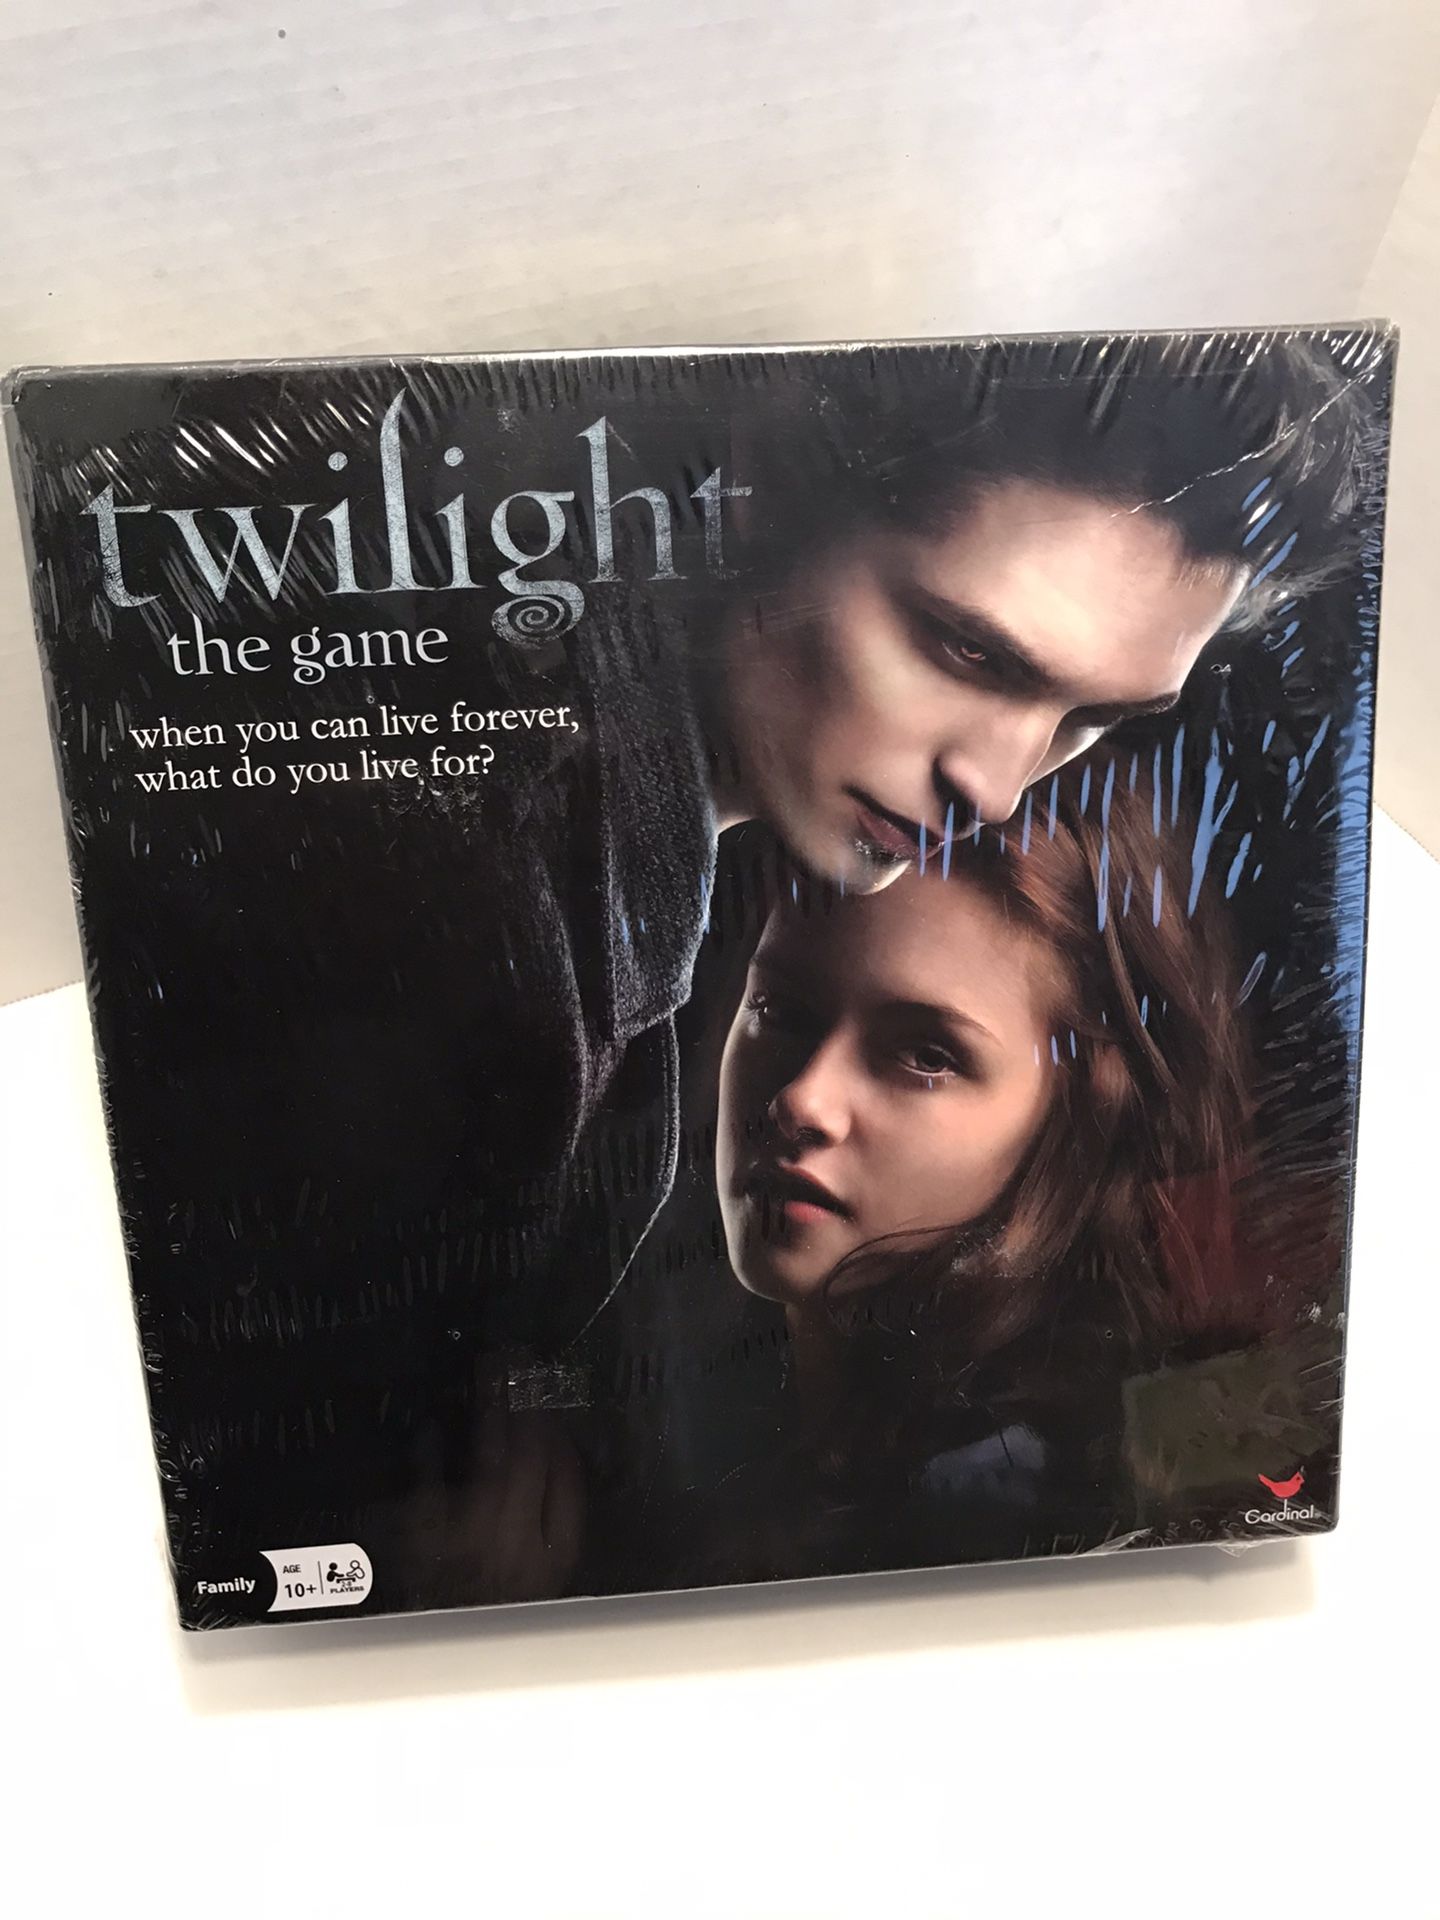 Twilight the game, New family game